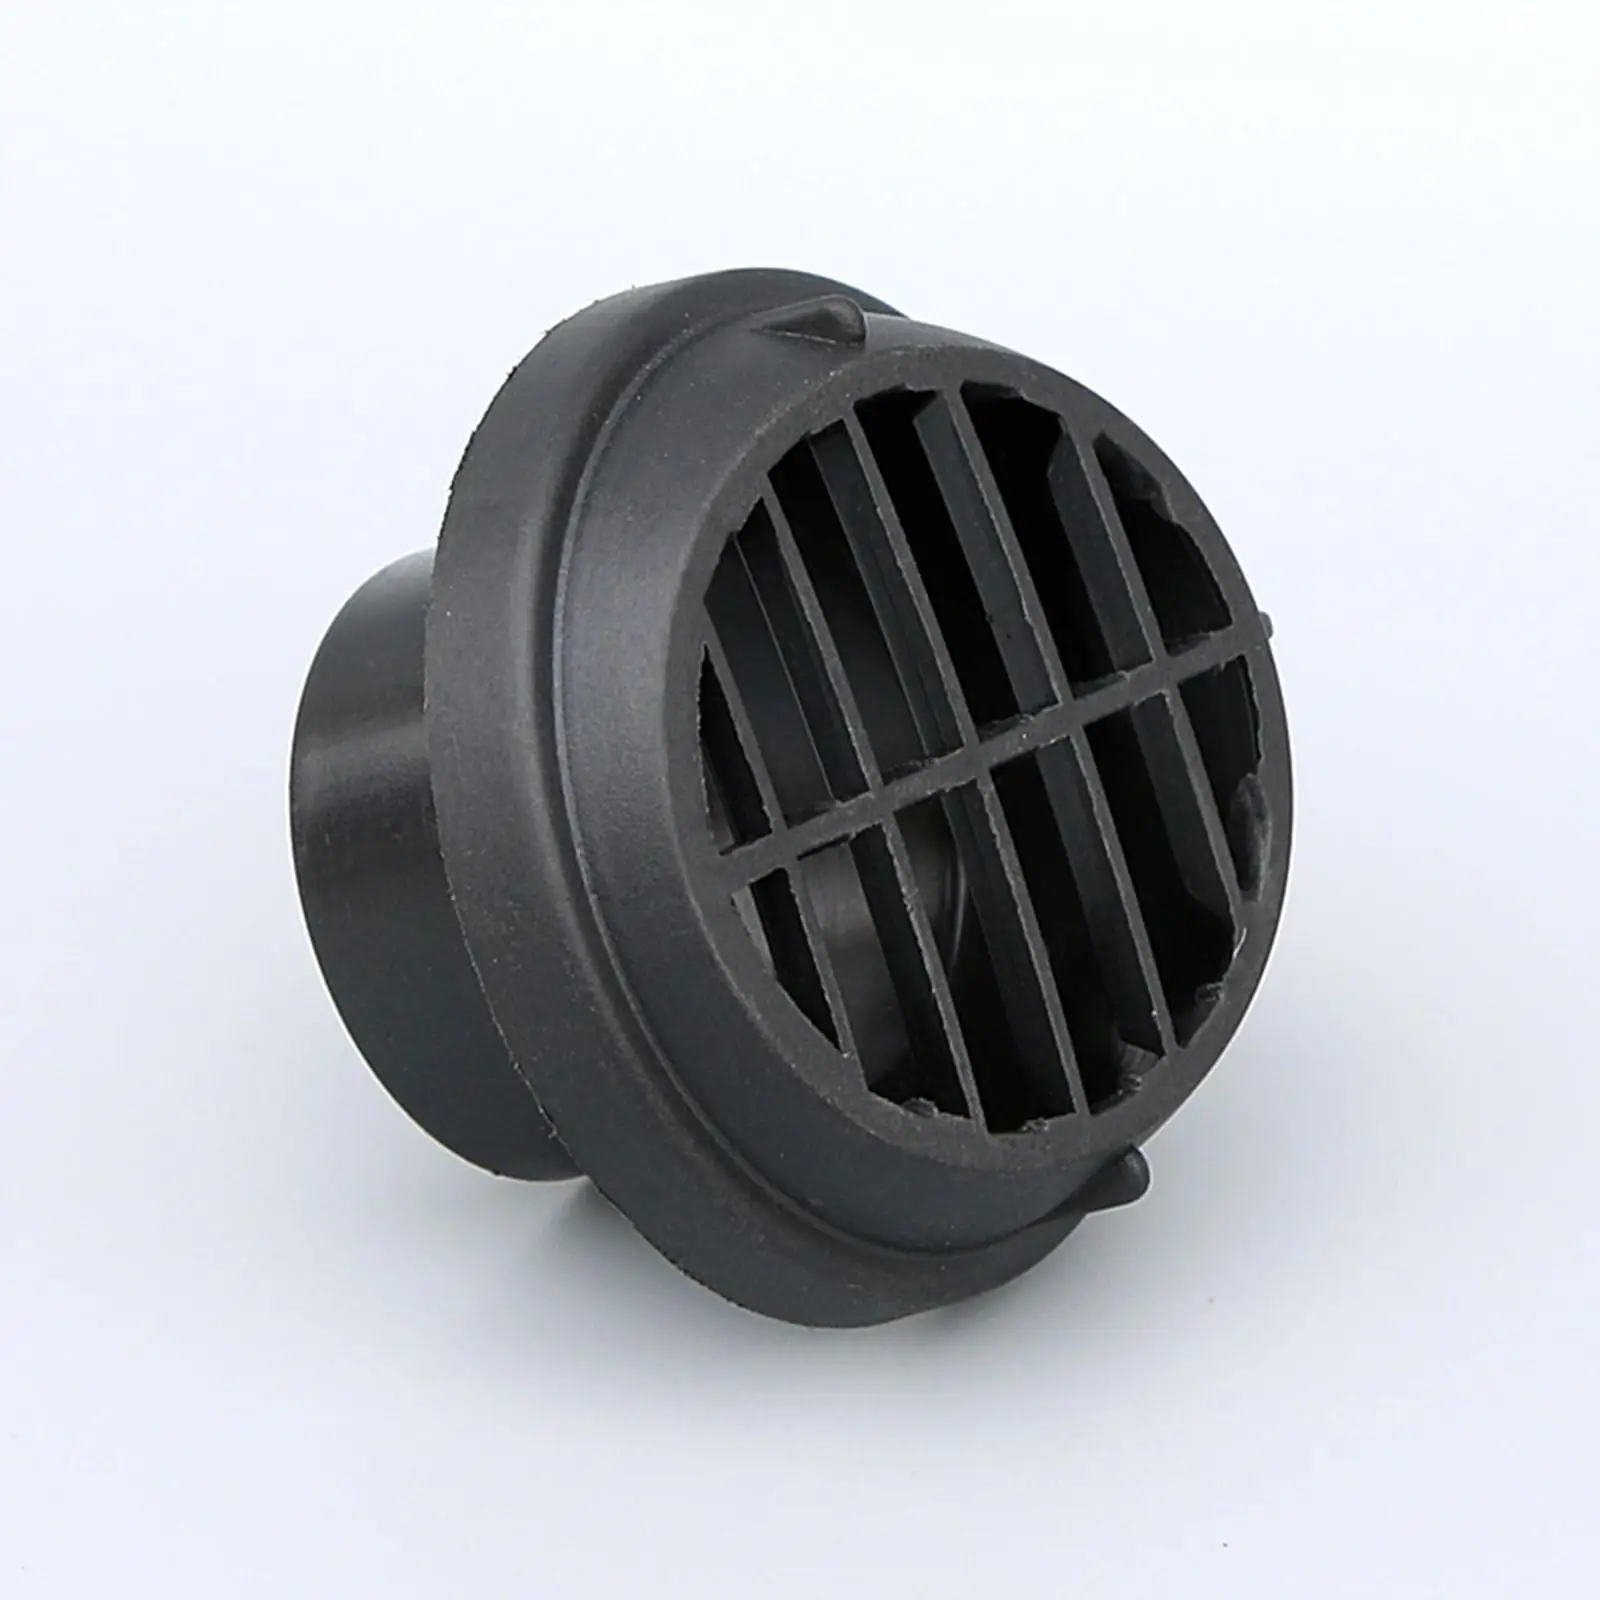 Parking Heater Air Vent Parking Heater Air Conditioner Vent Warm Heater Air Vent Outlet for Automotive Accessory Replaces